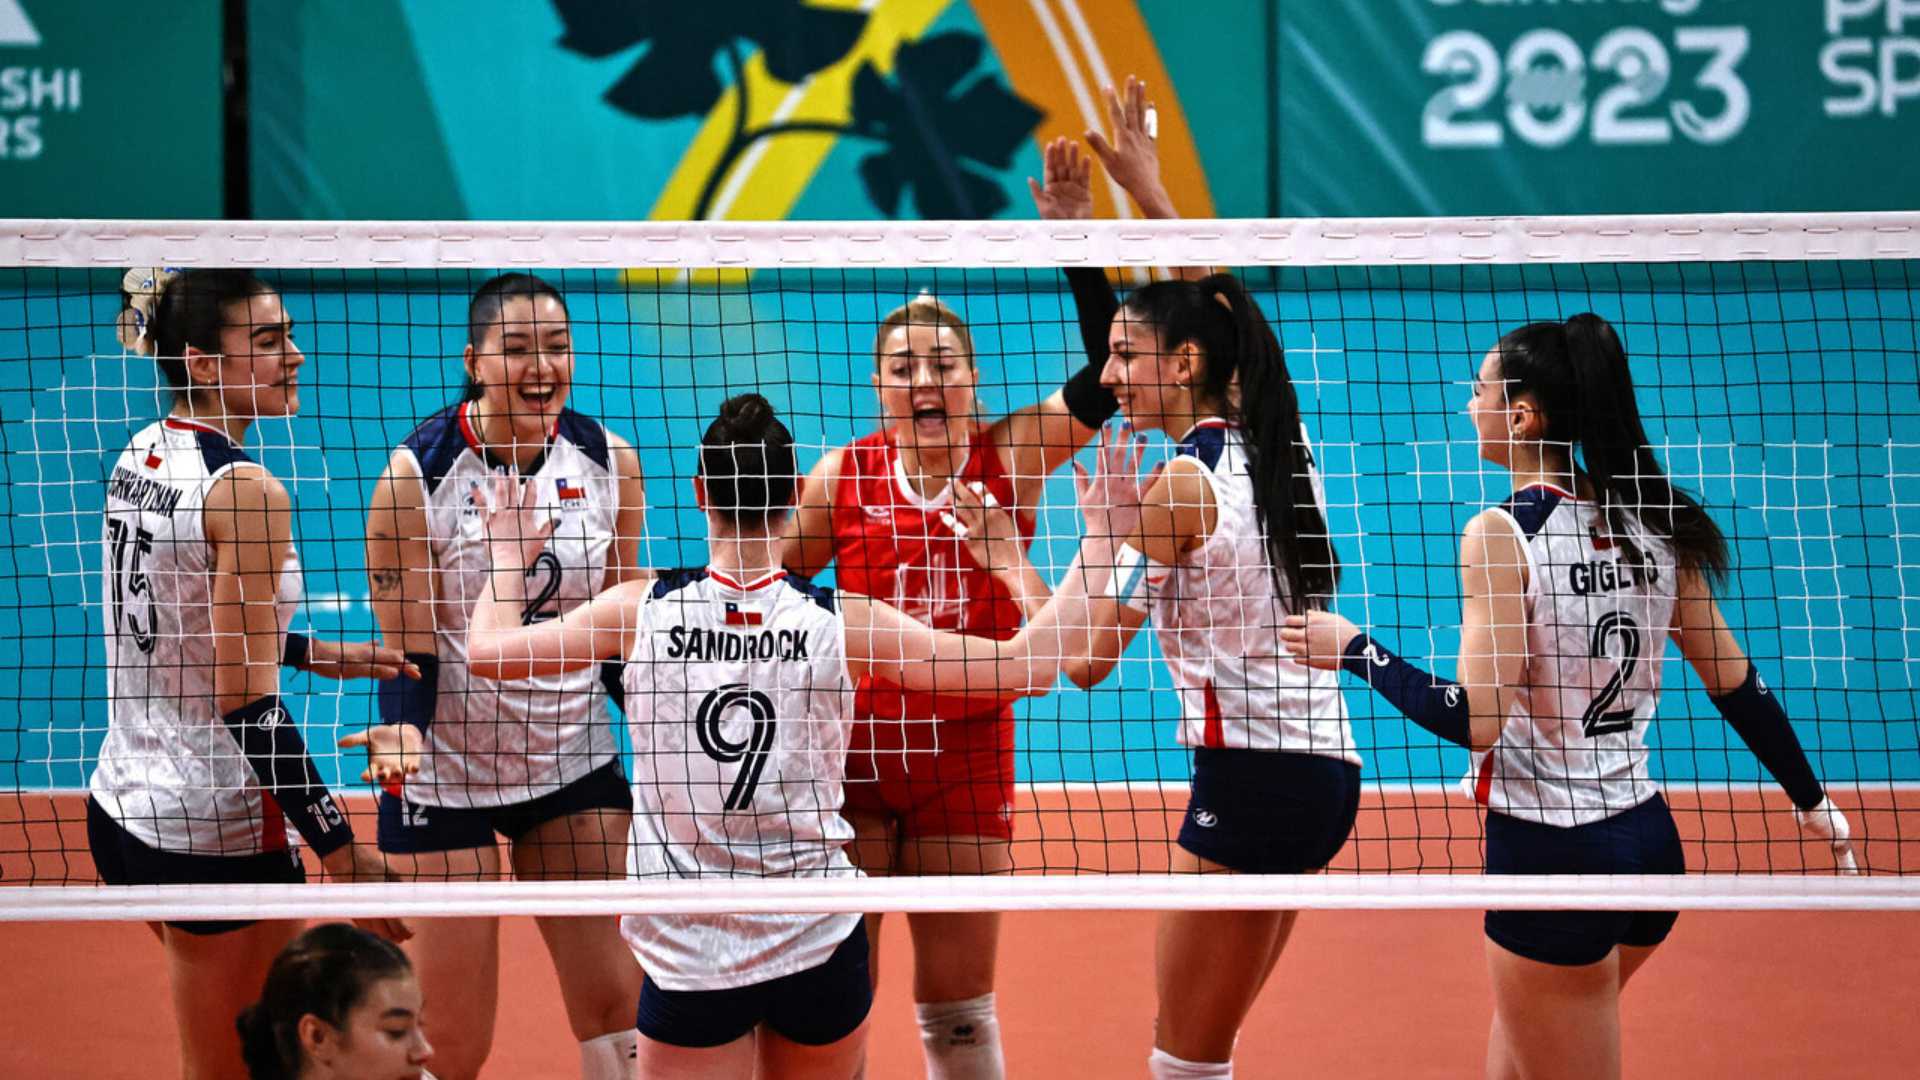 Chile defeats Colombia and achieves a historic fifth place in female volleyball